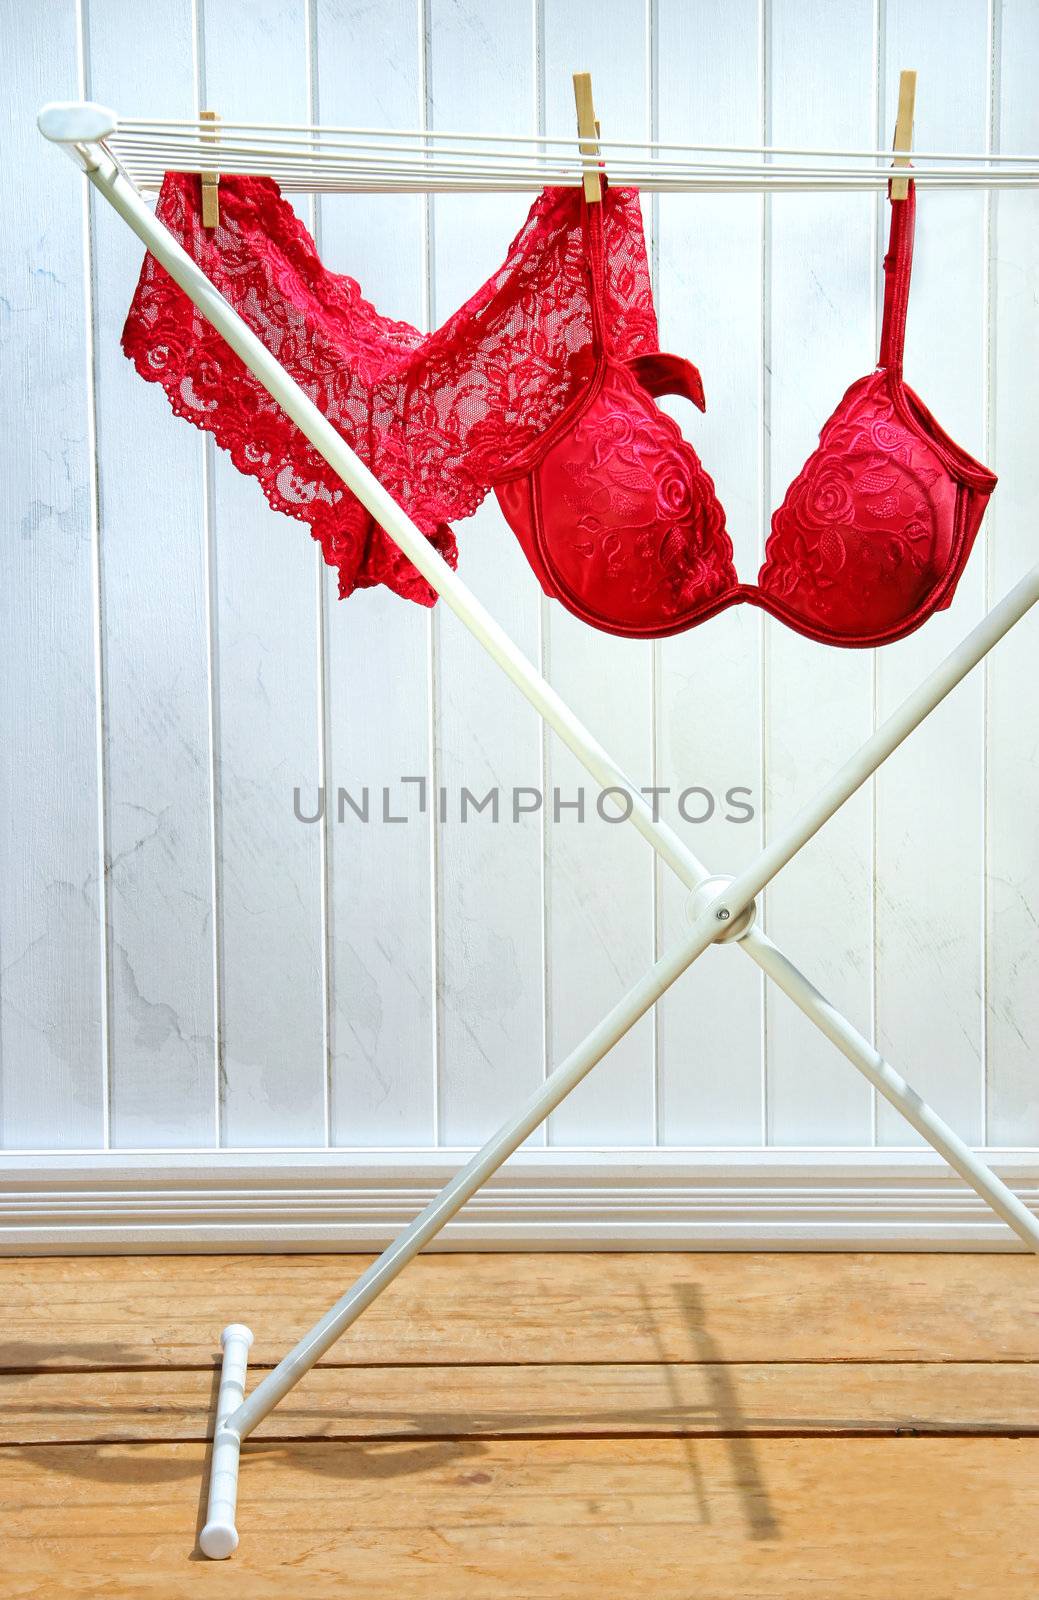 Red bra and panties drying on clothesline